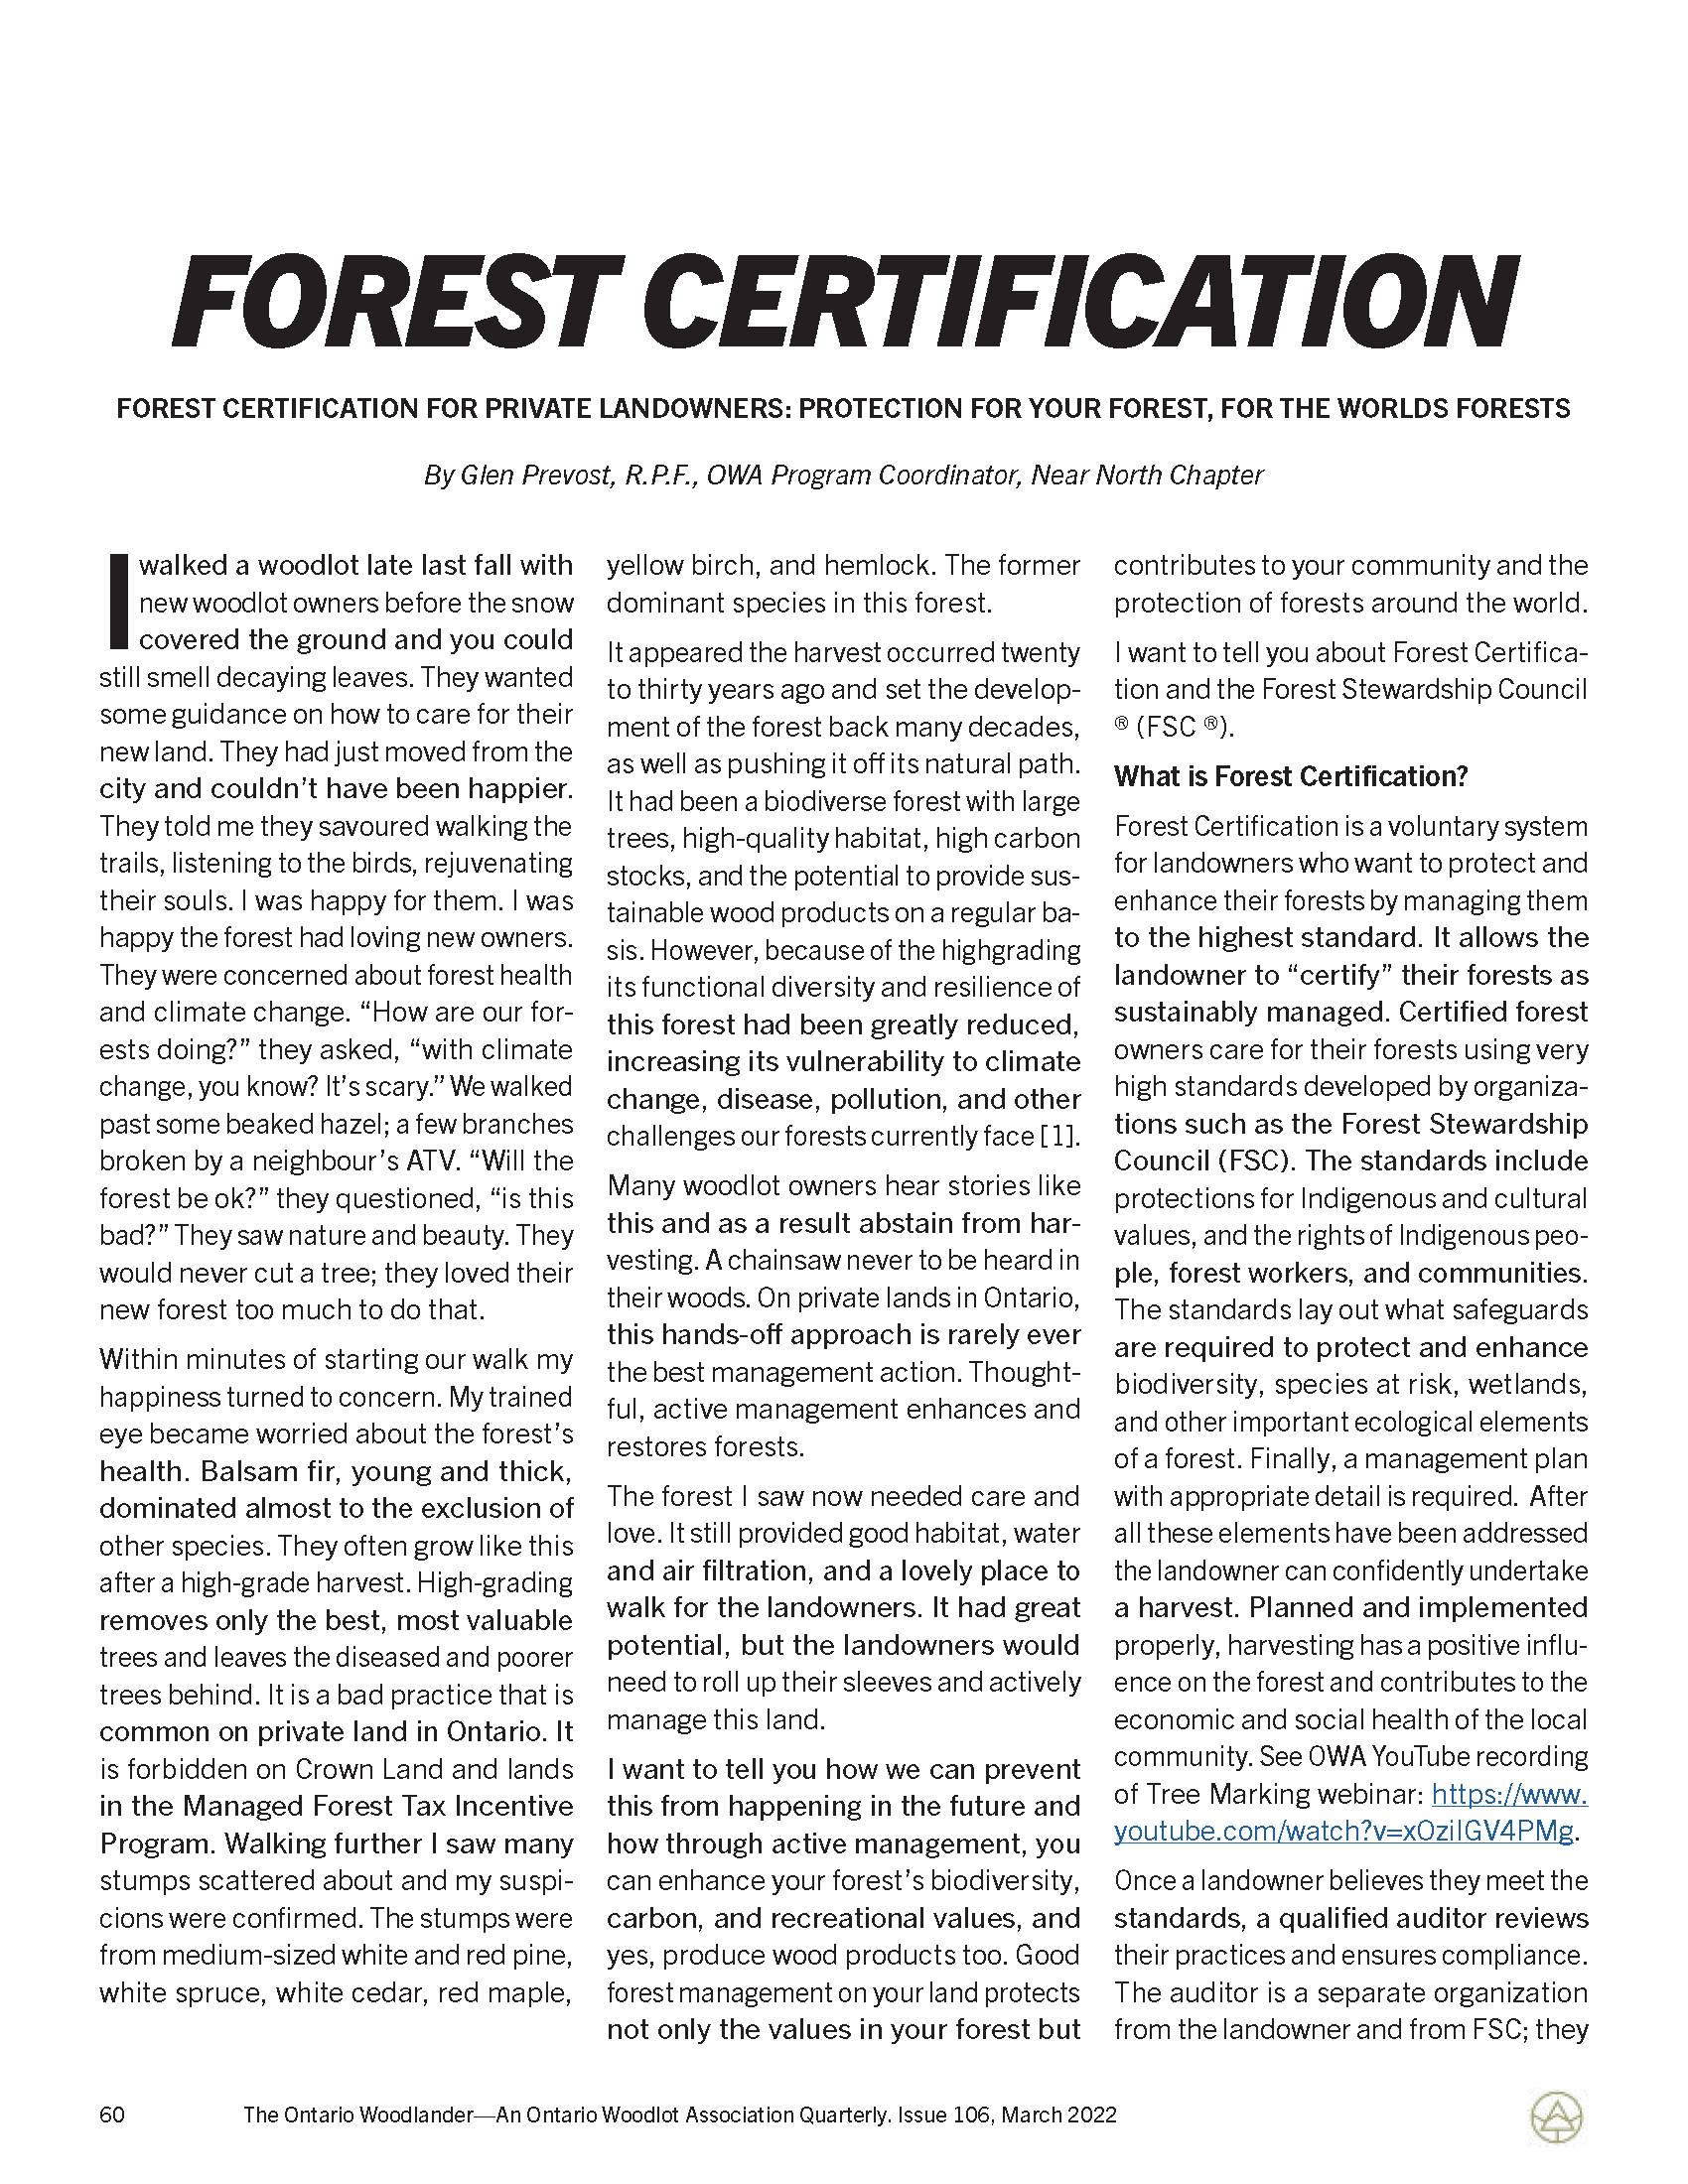 Page Ontario Woodlander Article March 2022 (2)_Page_60.png